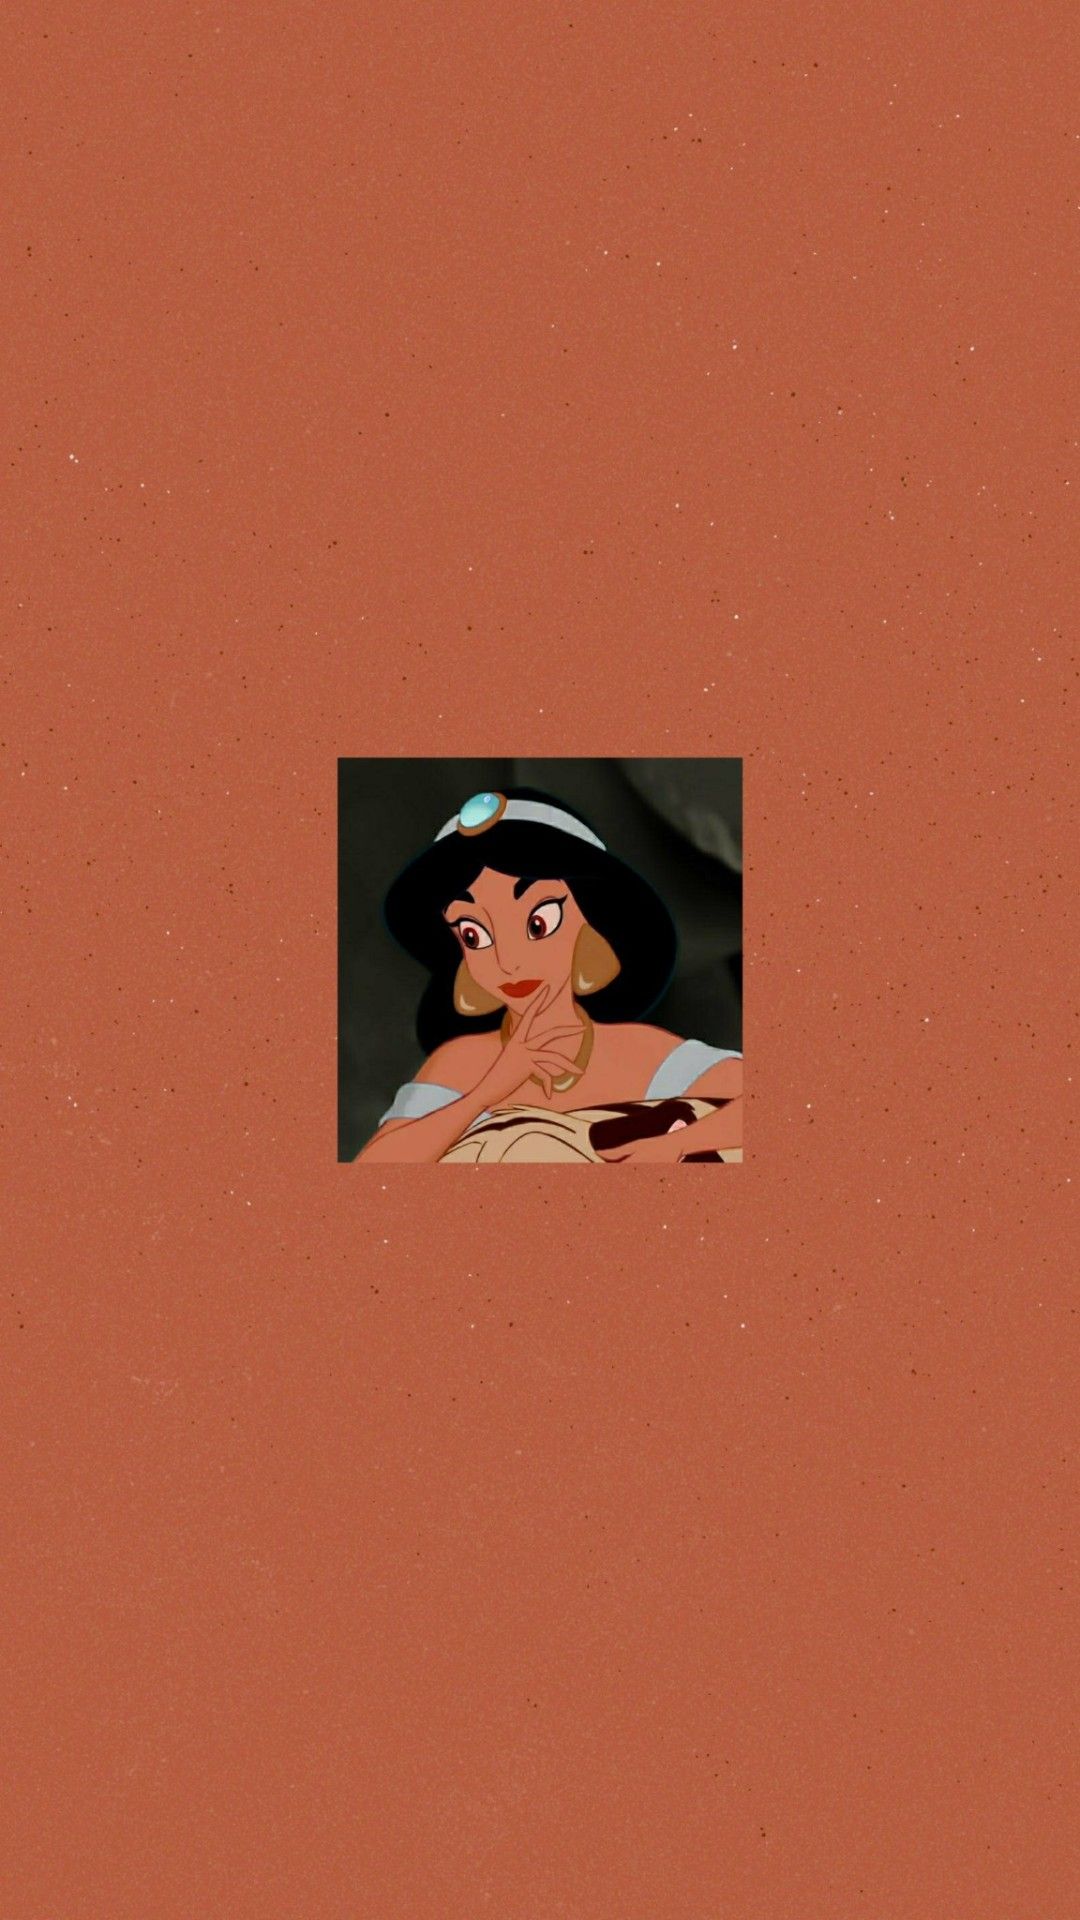 Wallpaper of Princess Jasmine from Aladdin, with a pink background - Belle